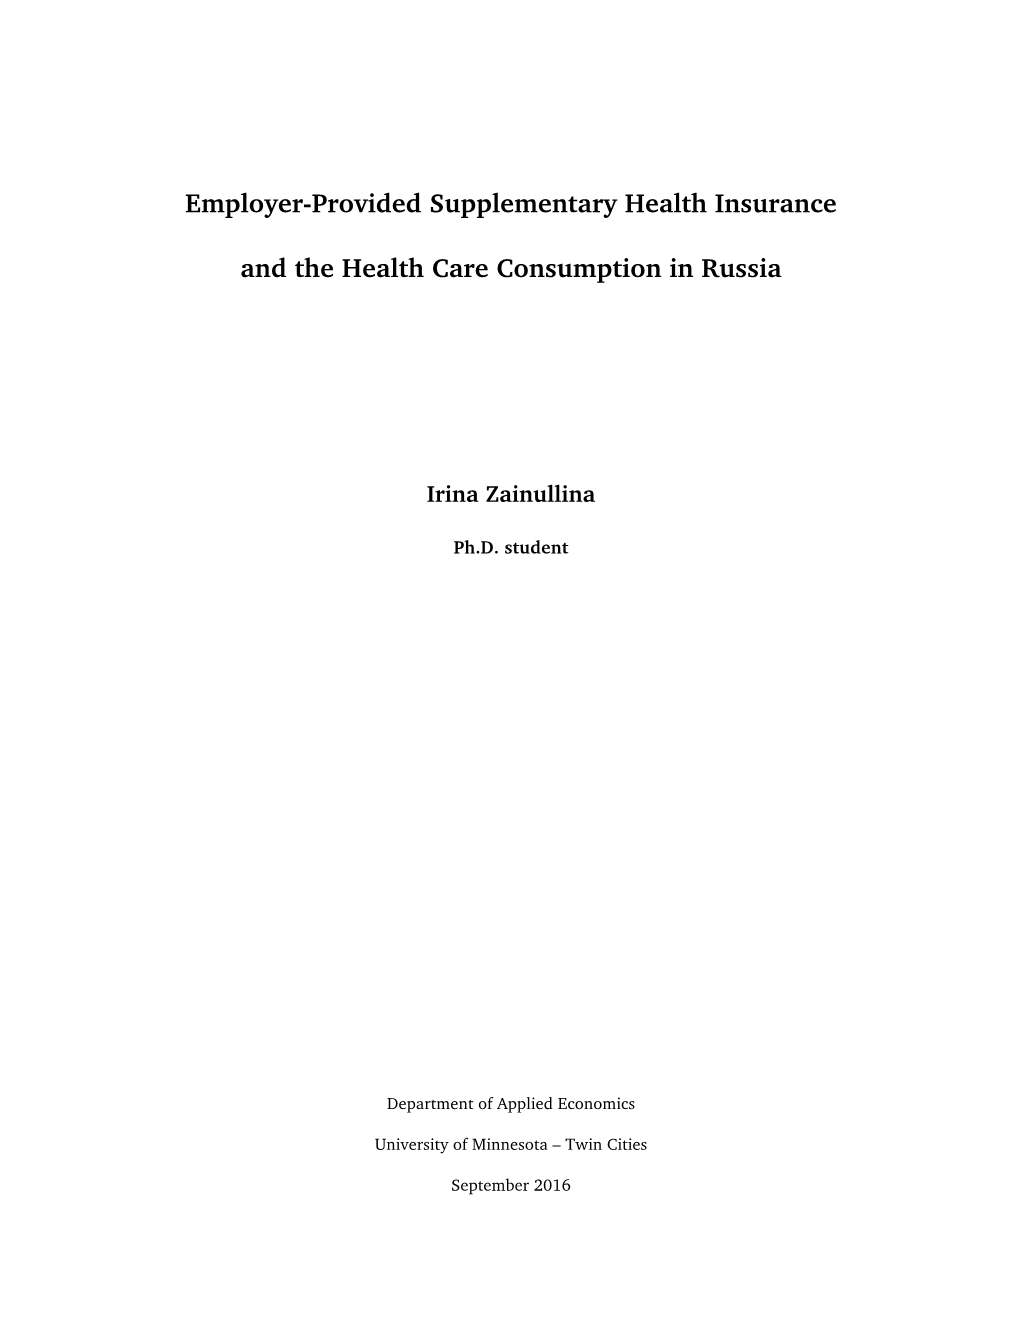 Employer-Provided Supplementary Health Insurance and the Health